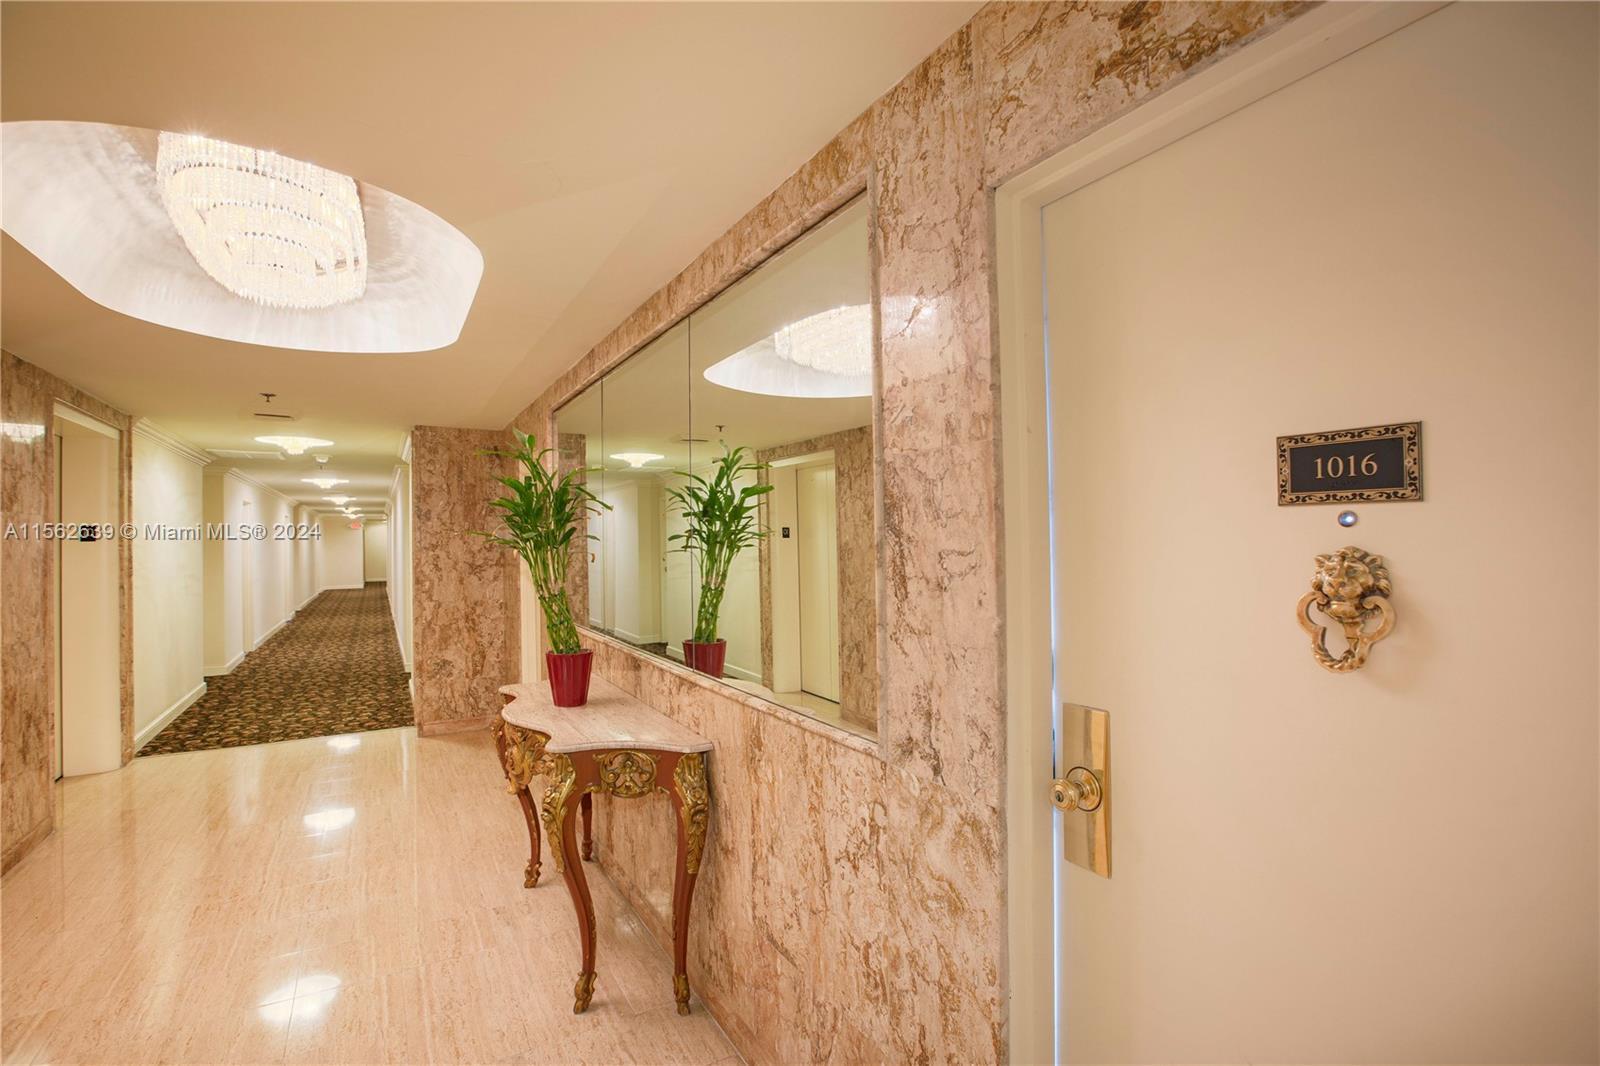 Photo of 700 Biltmore Wy #1016 in Coral Gables, FL